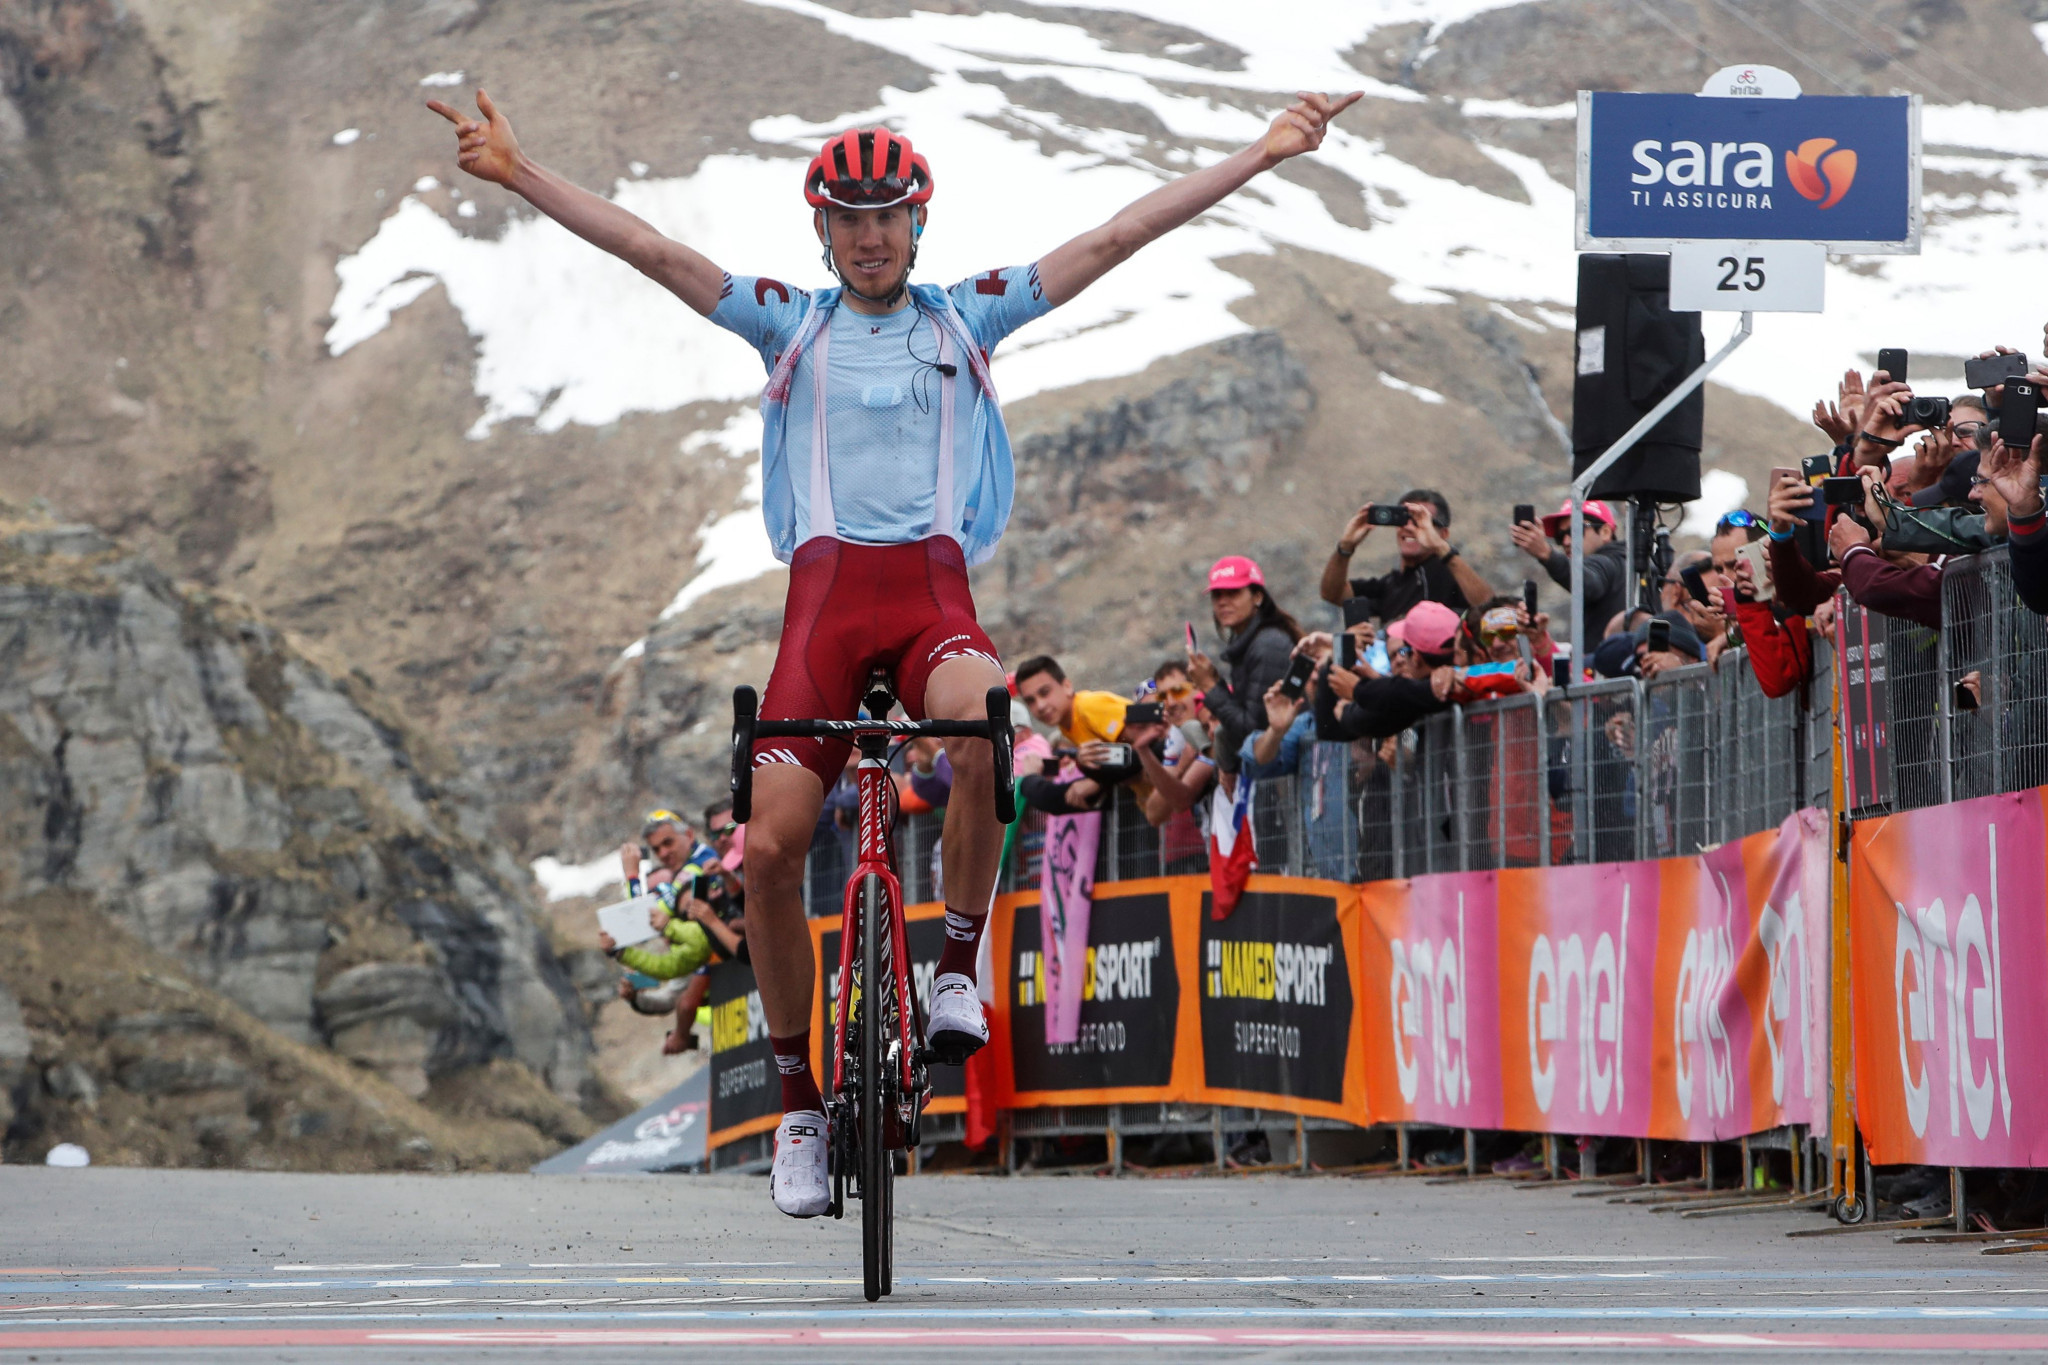  Zakarin wins Giro d’Italia stage 13 to stay in contention as Polanc remains overall leader